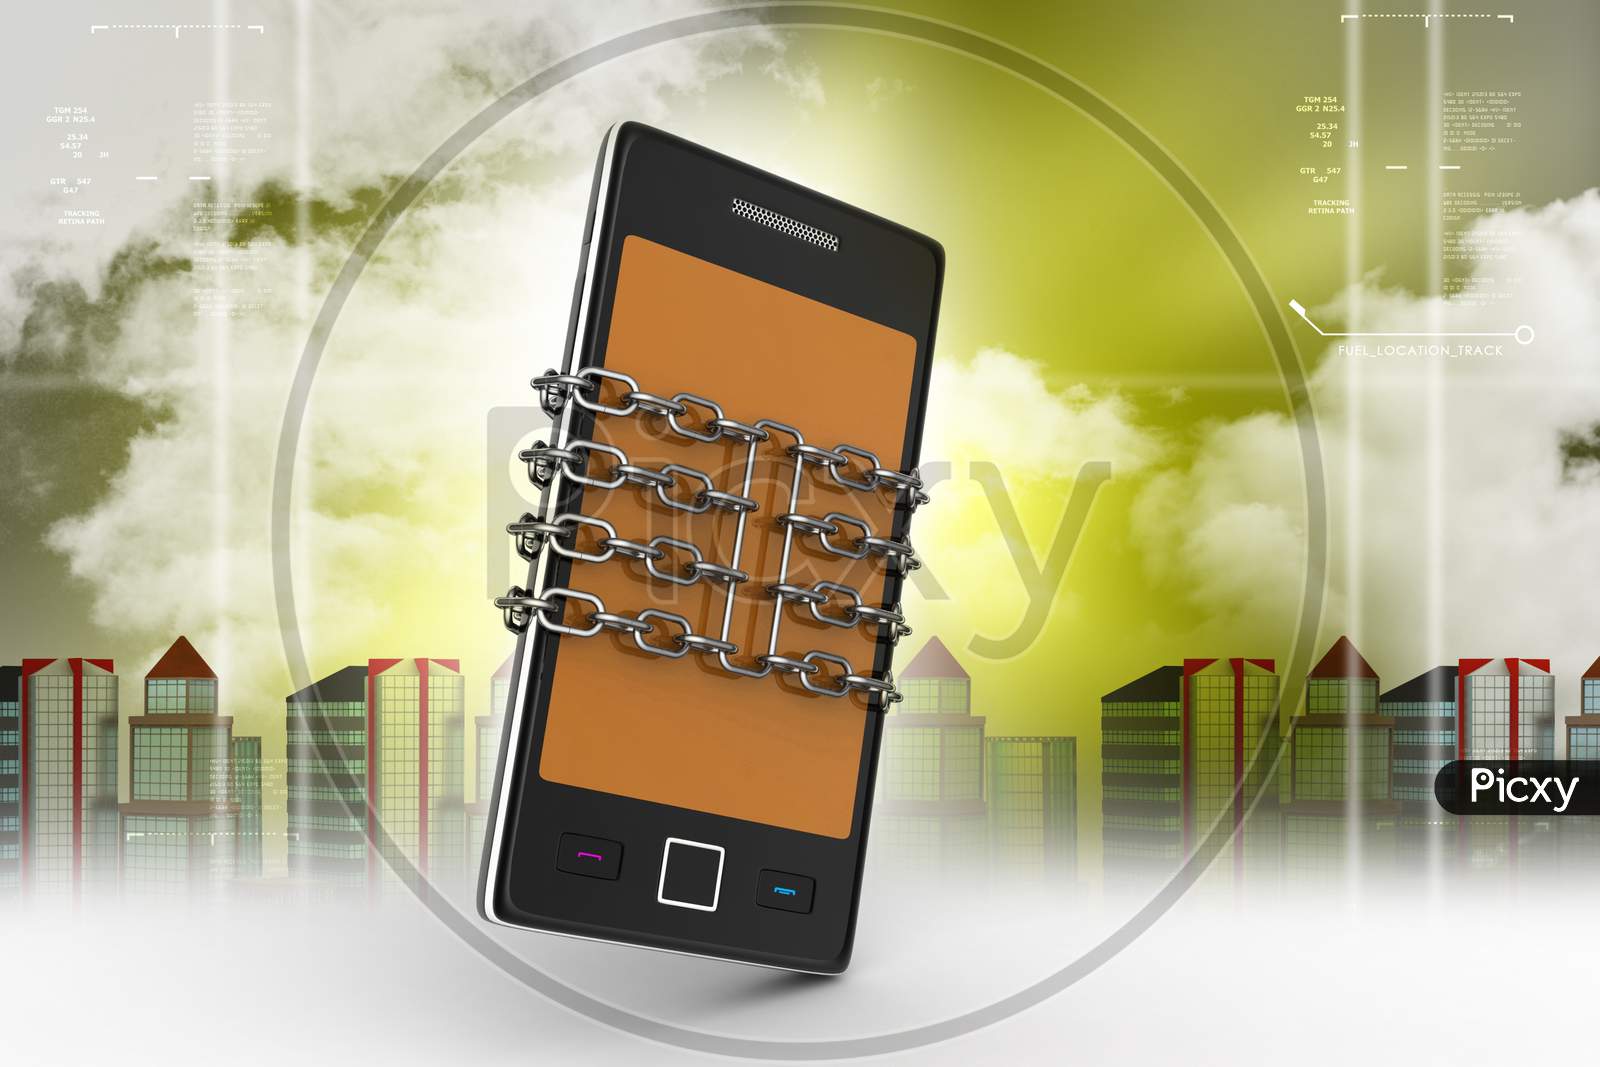 A Smartphone or Mobile Phone locked with Chains